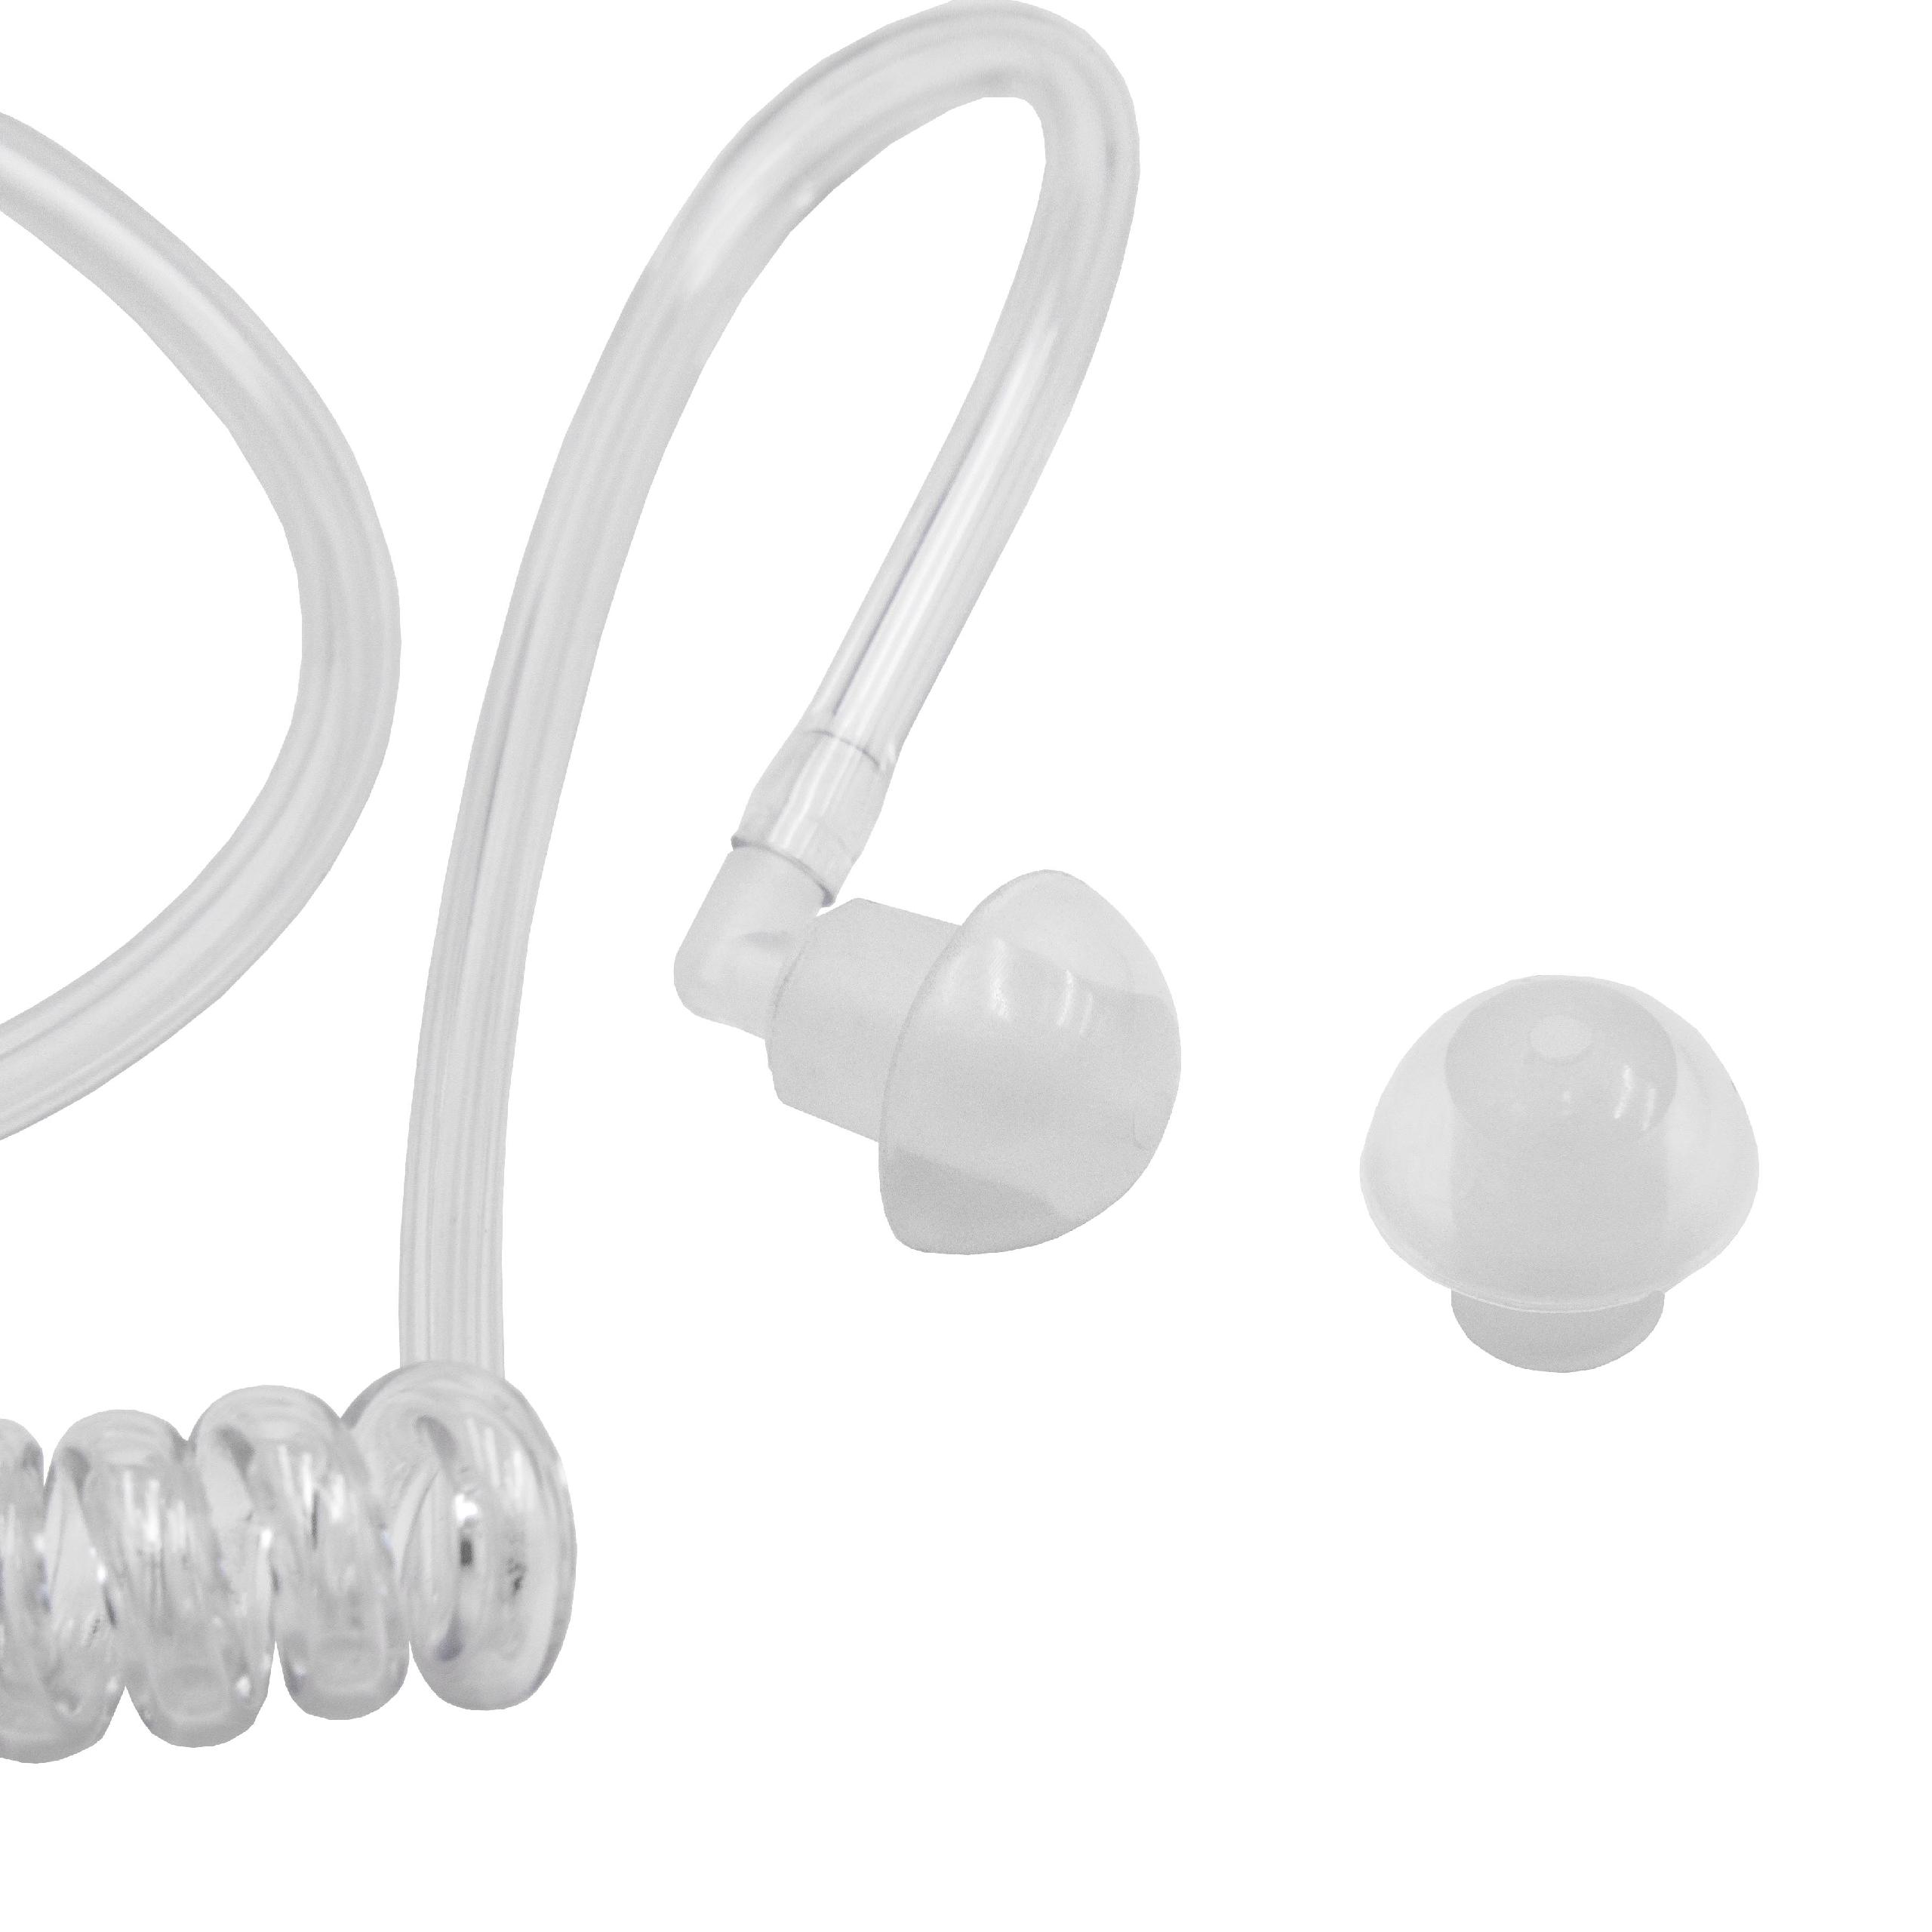 Sound Tube Earphones suitable for Motorola FTN6707 Headset & all Standard Security Headsets + Clip